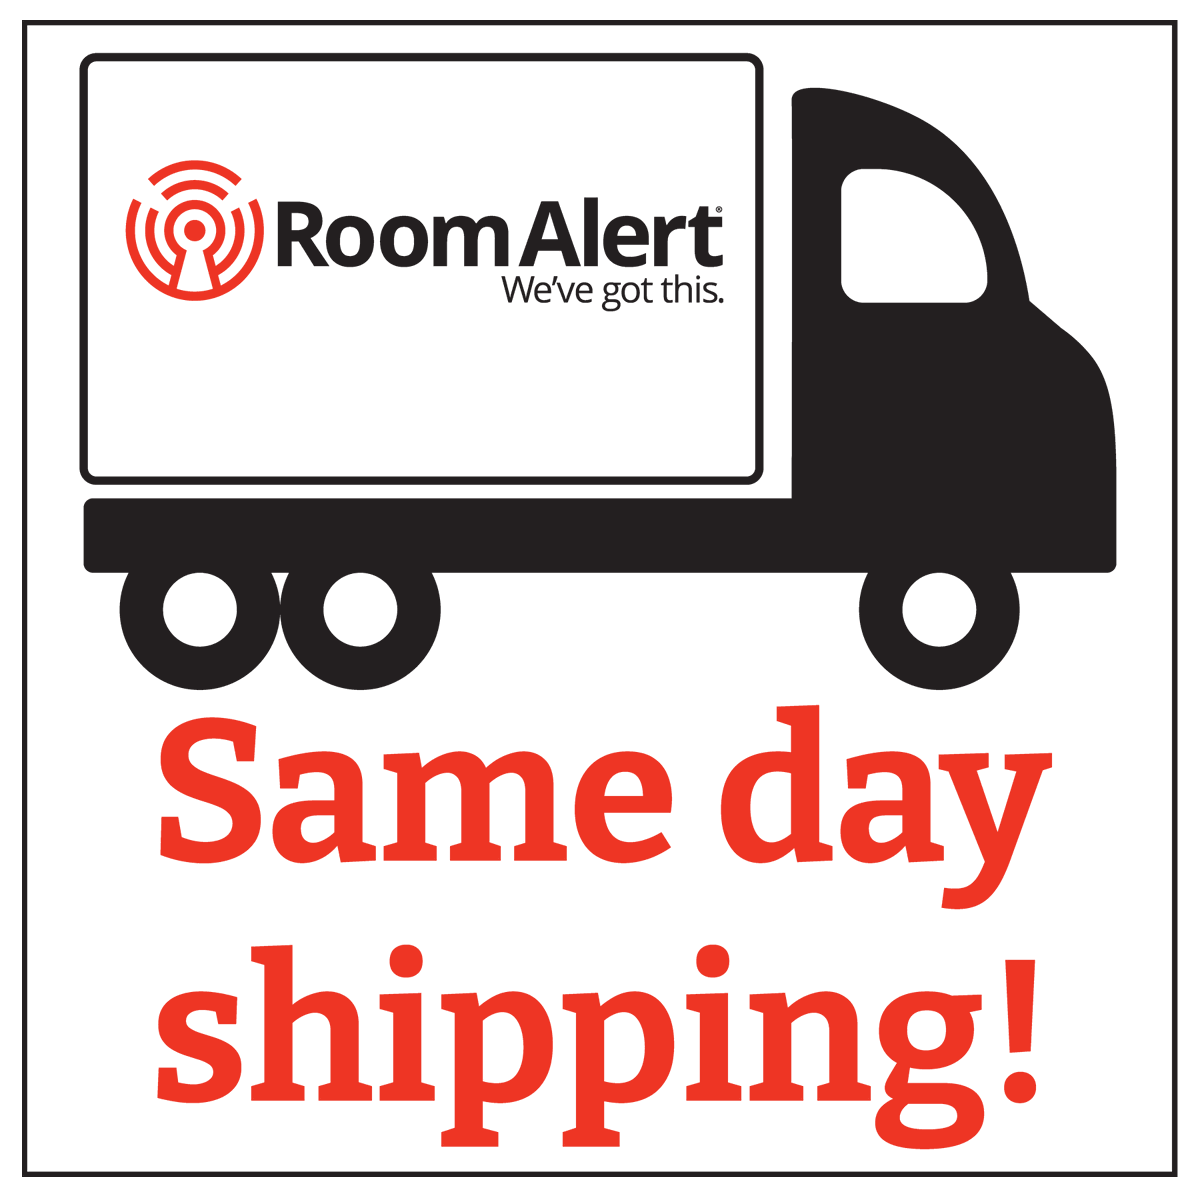 We are extremely proud to be able to offer customers same-day shipping on orders placed before 3 pm EST. #RoomAlert #EnvironmentalMonitoring #Shipping